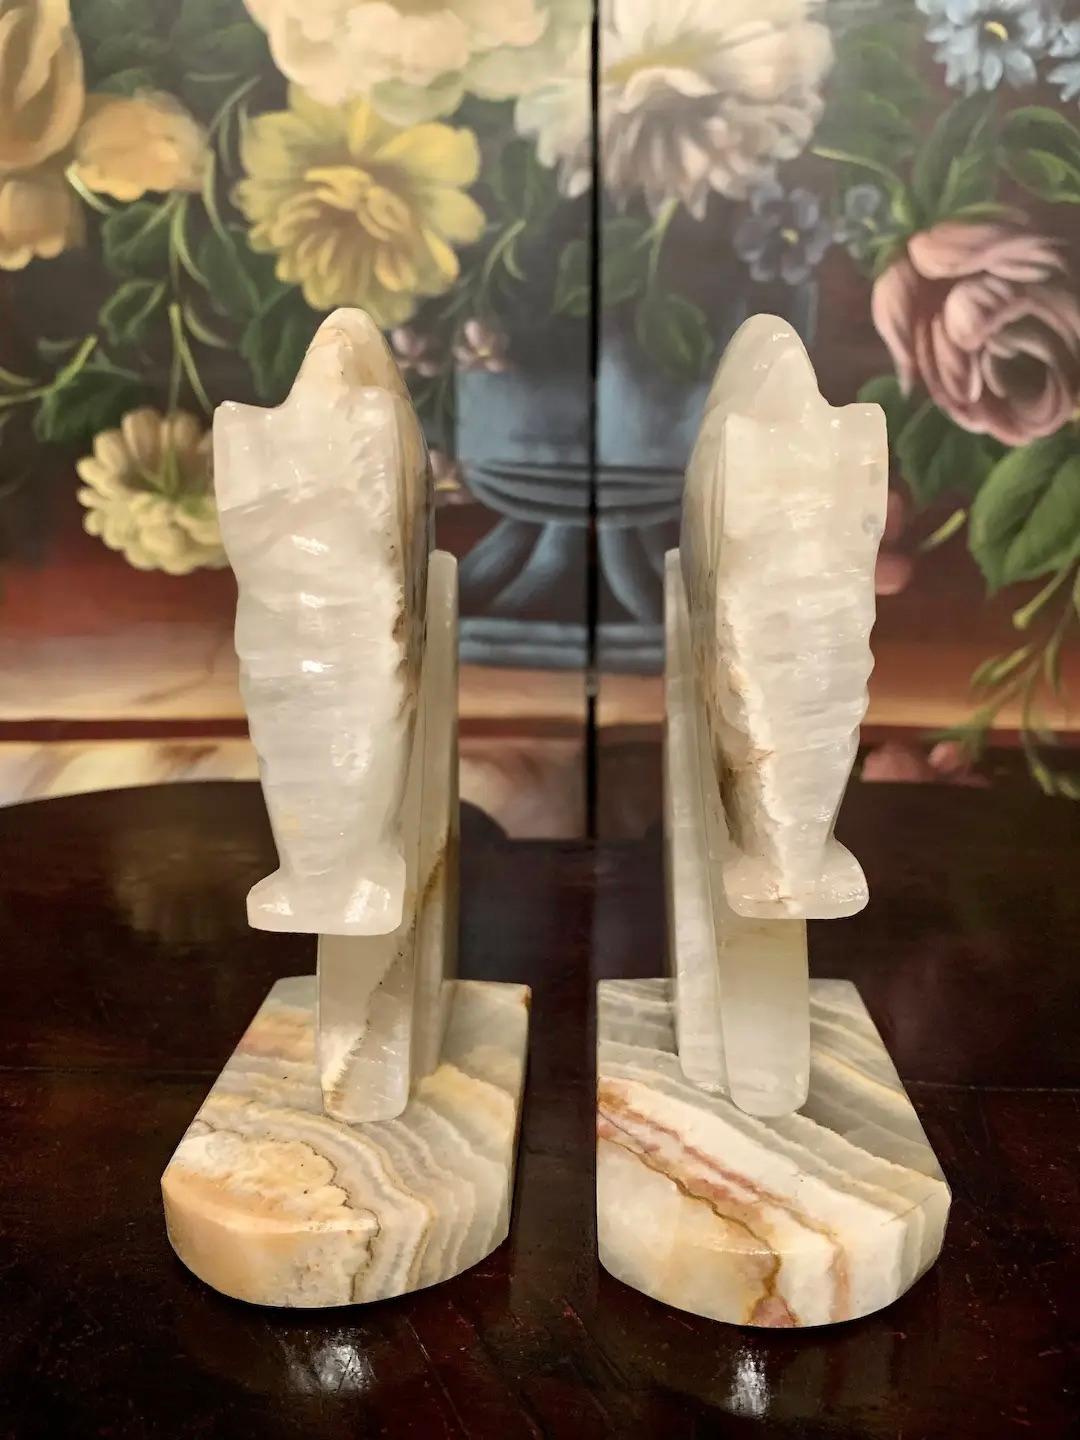 A stunning pair of exquisitely hand-carved figurehead bookends sculpted from a singular piece of authentic Mexican white agate, beautifully grained and wonderfully preserved. 

Prized for centuries dating back to the ancient Greek and Egyptian